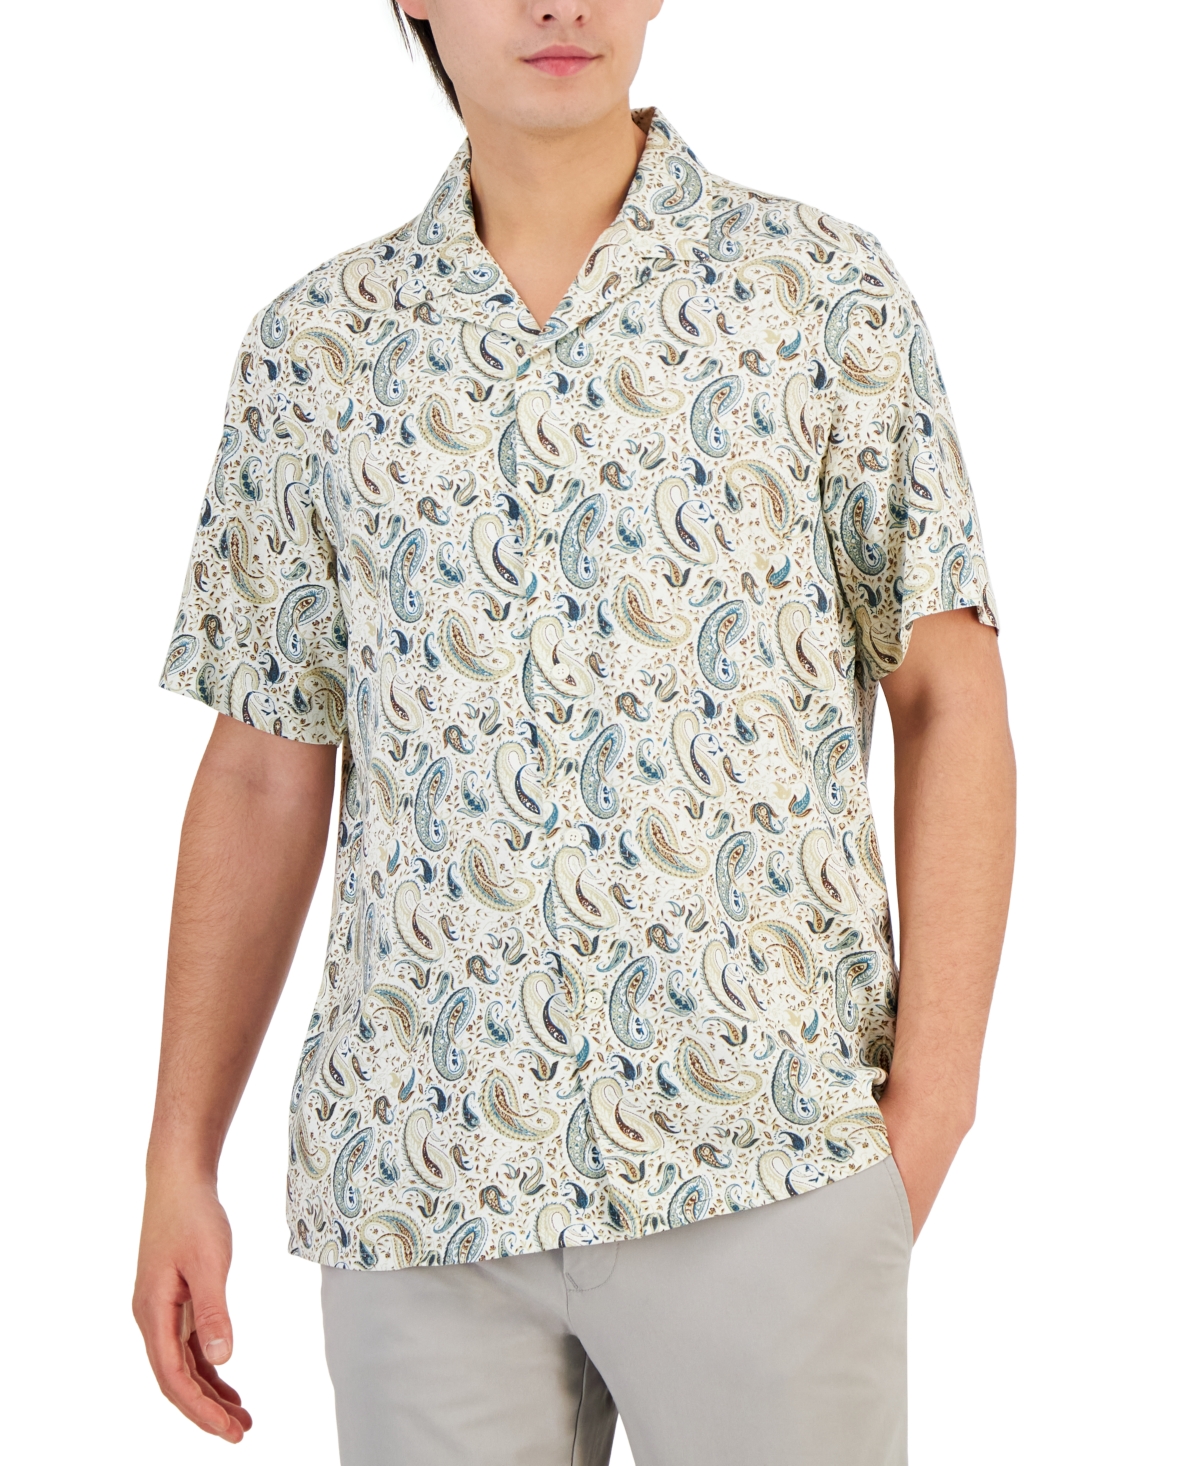 Men's Tonno Short-Sleeve Paisley Button-Front Camp Shirt, Created for Macy's - Bright White